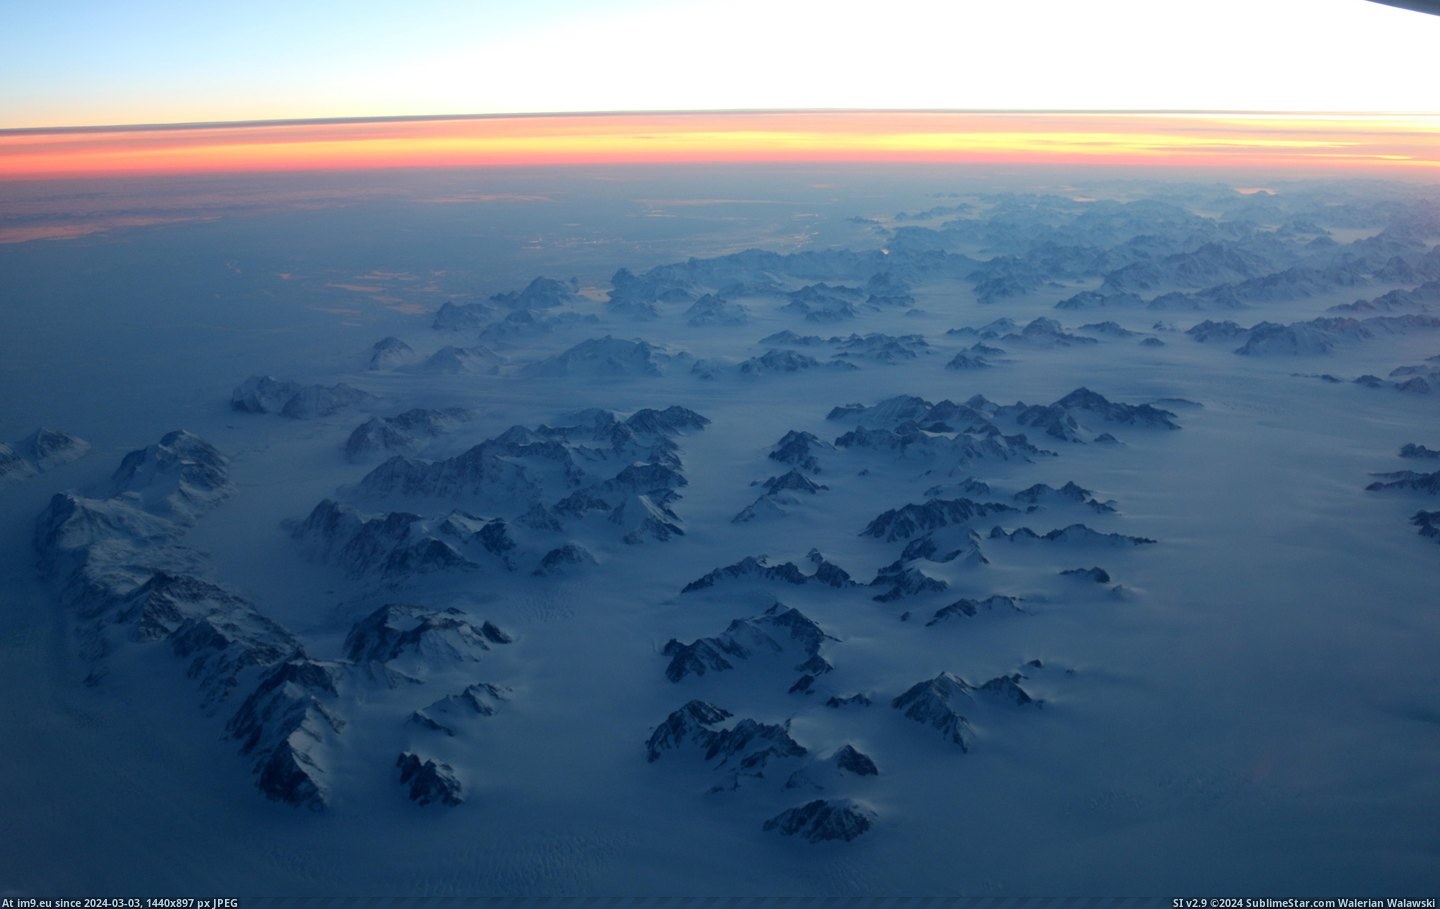 #Sunset #Canada #Iceland #Flight #Meets #Greenland #Ocean #Lucky #Frozen [Earthporn] Where Greenland meets the frozen ocean at sunset. Lucky view on a flight between Iceland and Canada  [5472x3419] Pic. (Image of album My r/EARTHPORN favs))